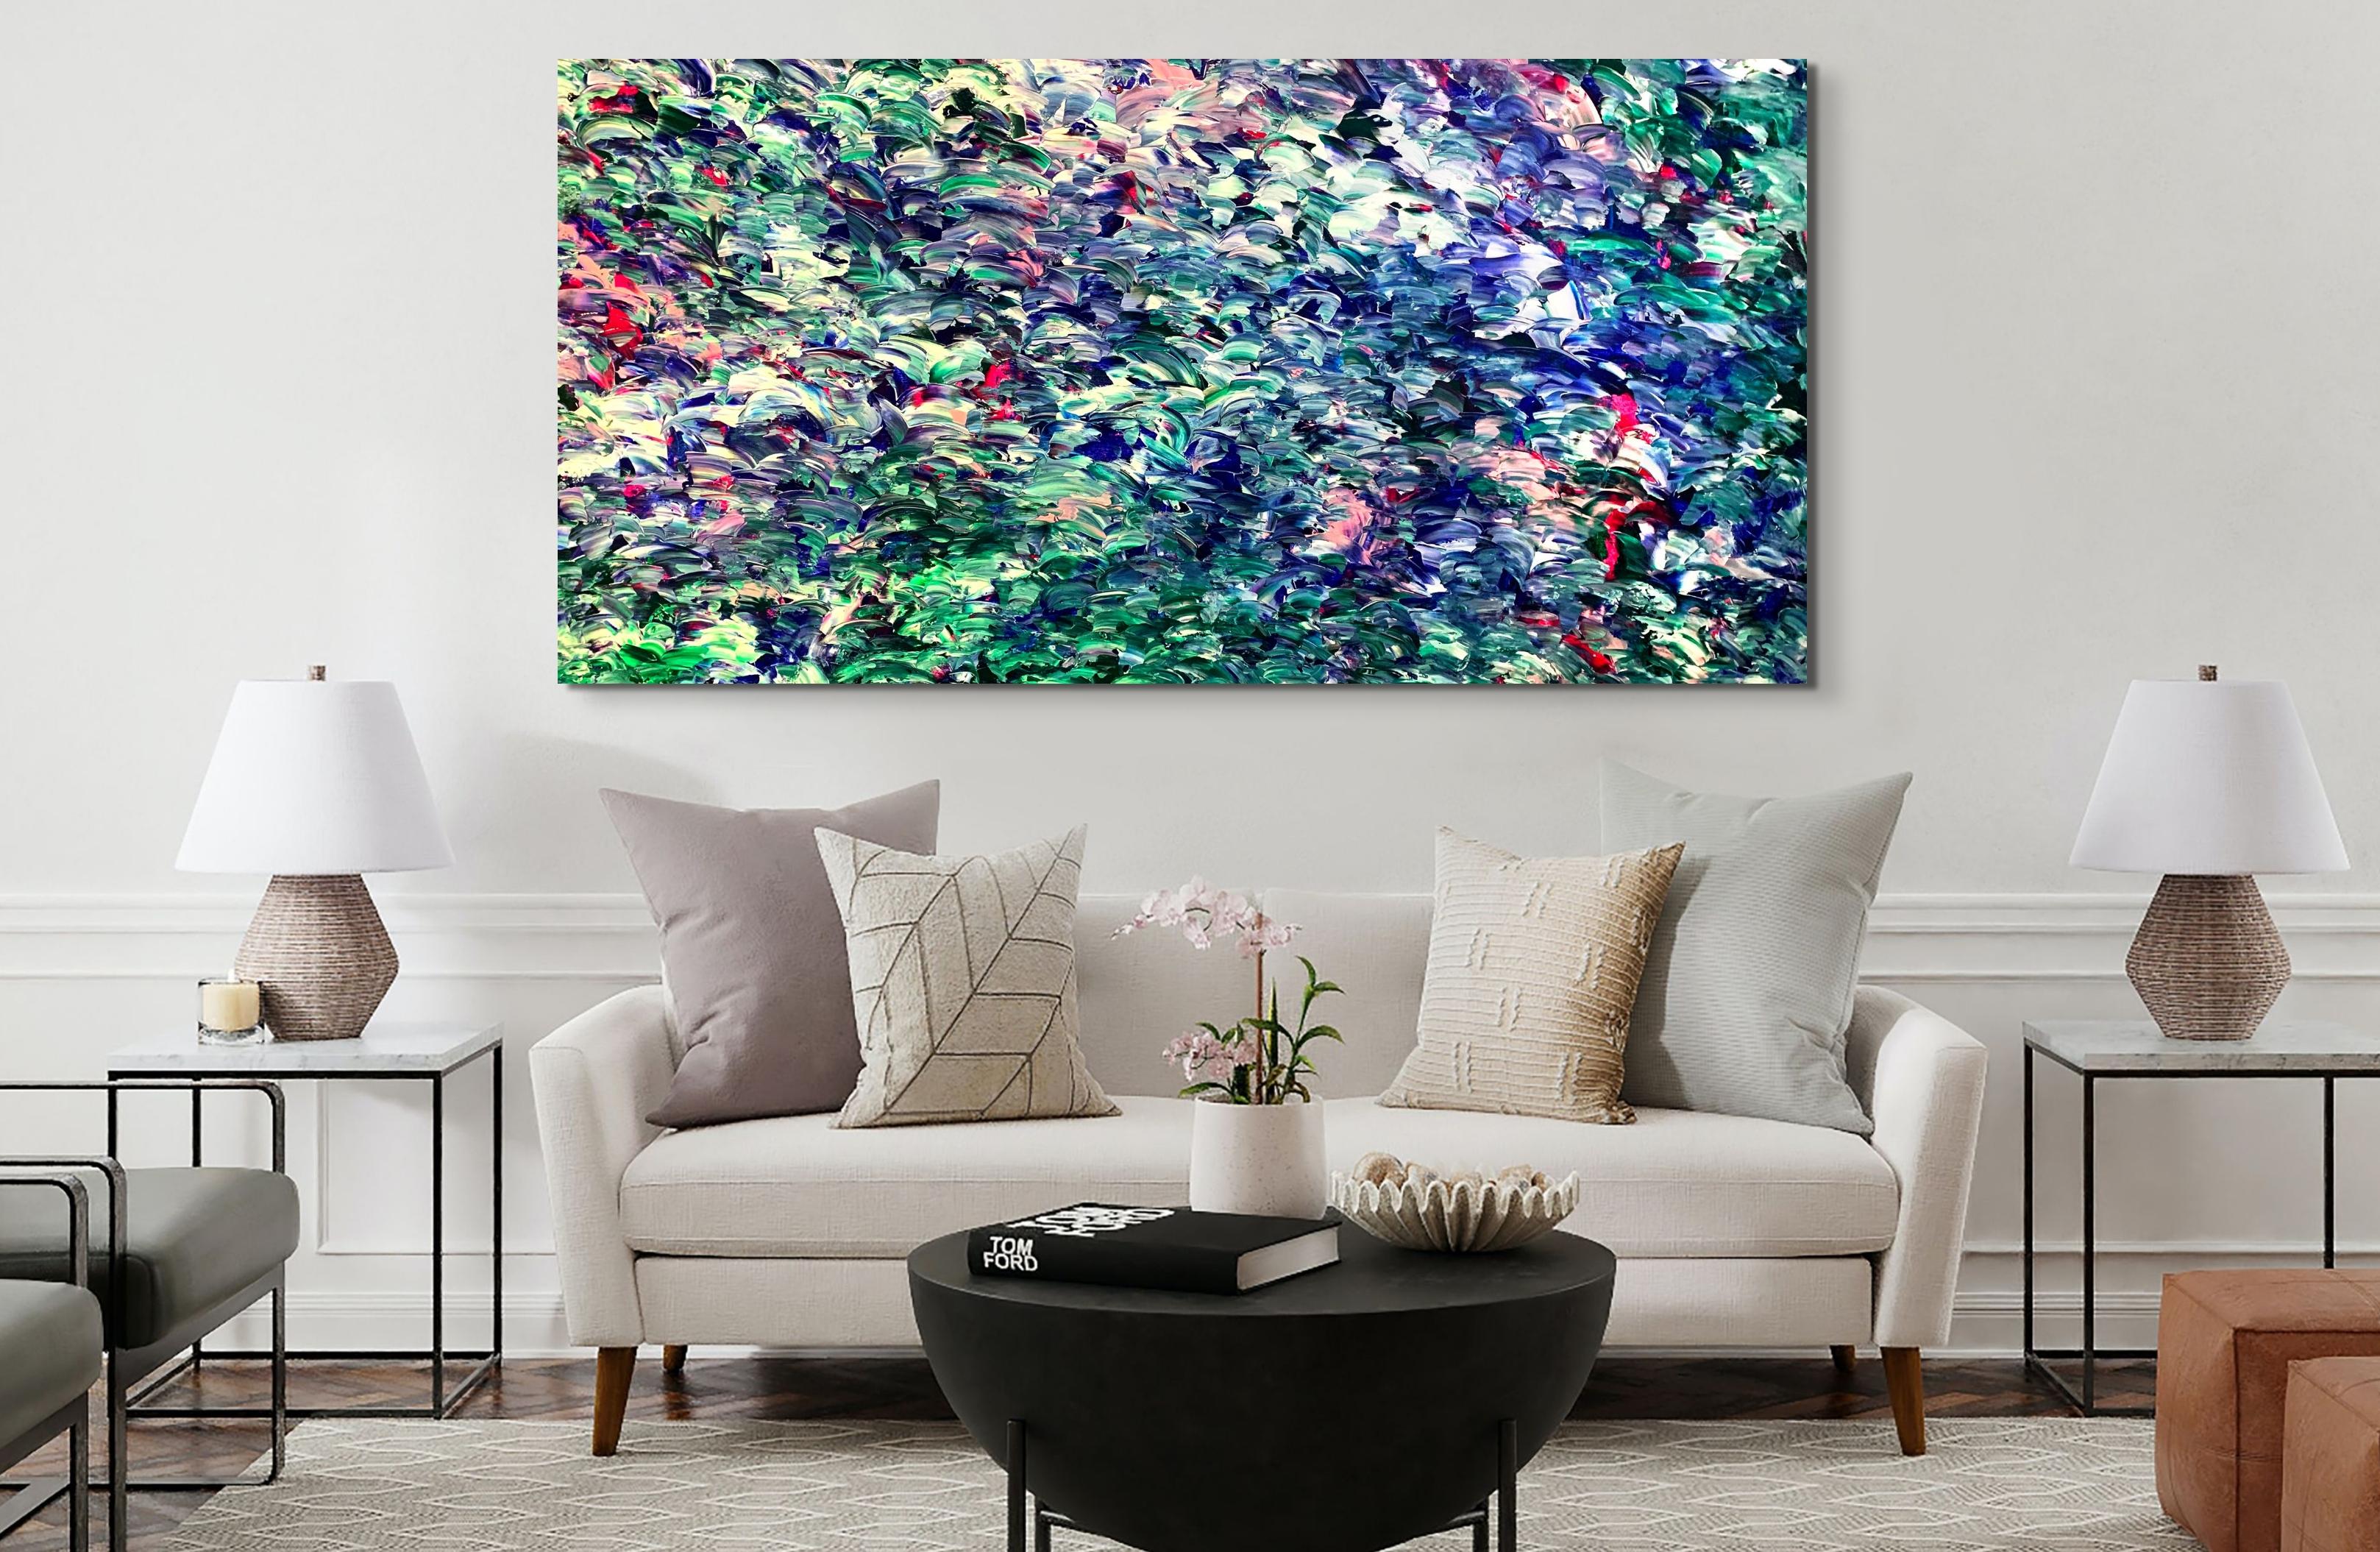 Caressing Undulation - Abstract Expressionist Painting by Estelle Asmodelle